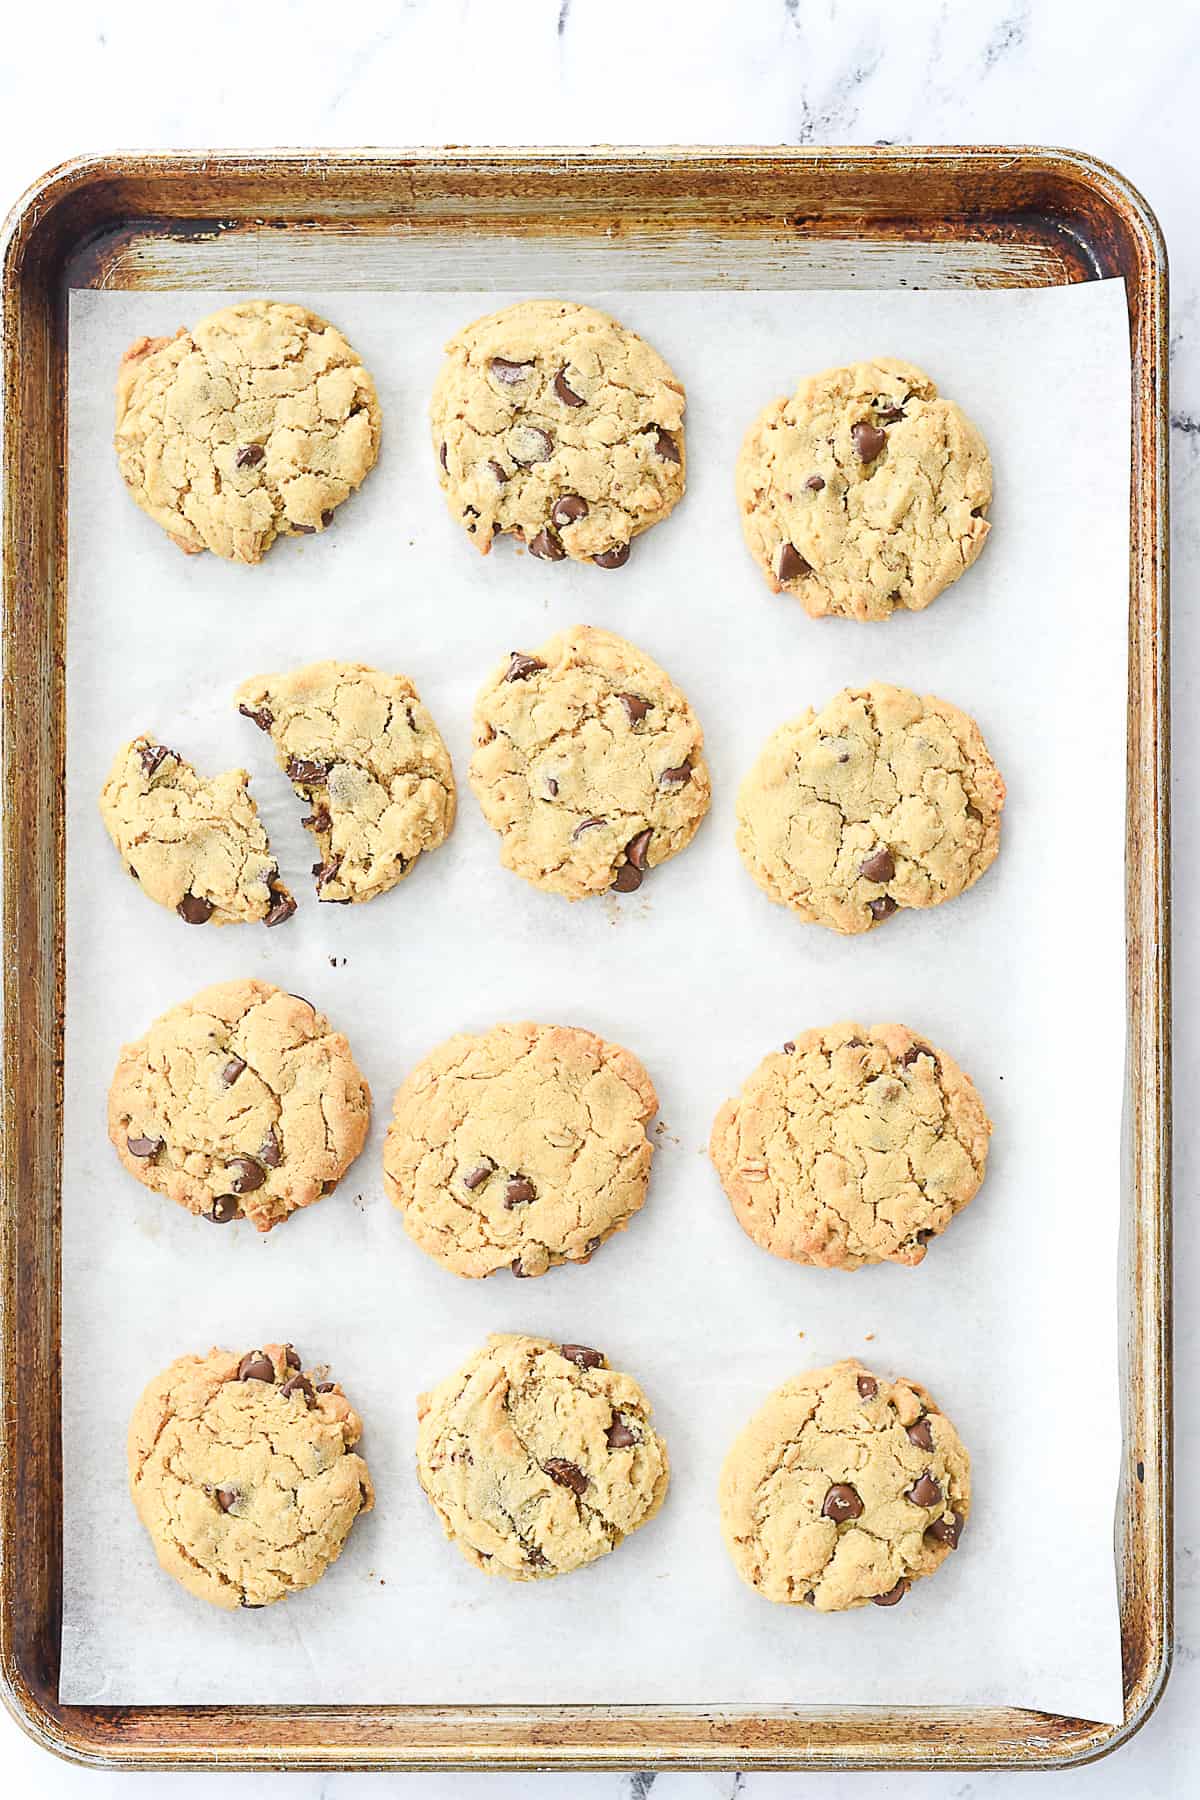 oatmeal chocolate chip cookies on a baking sheet